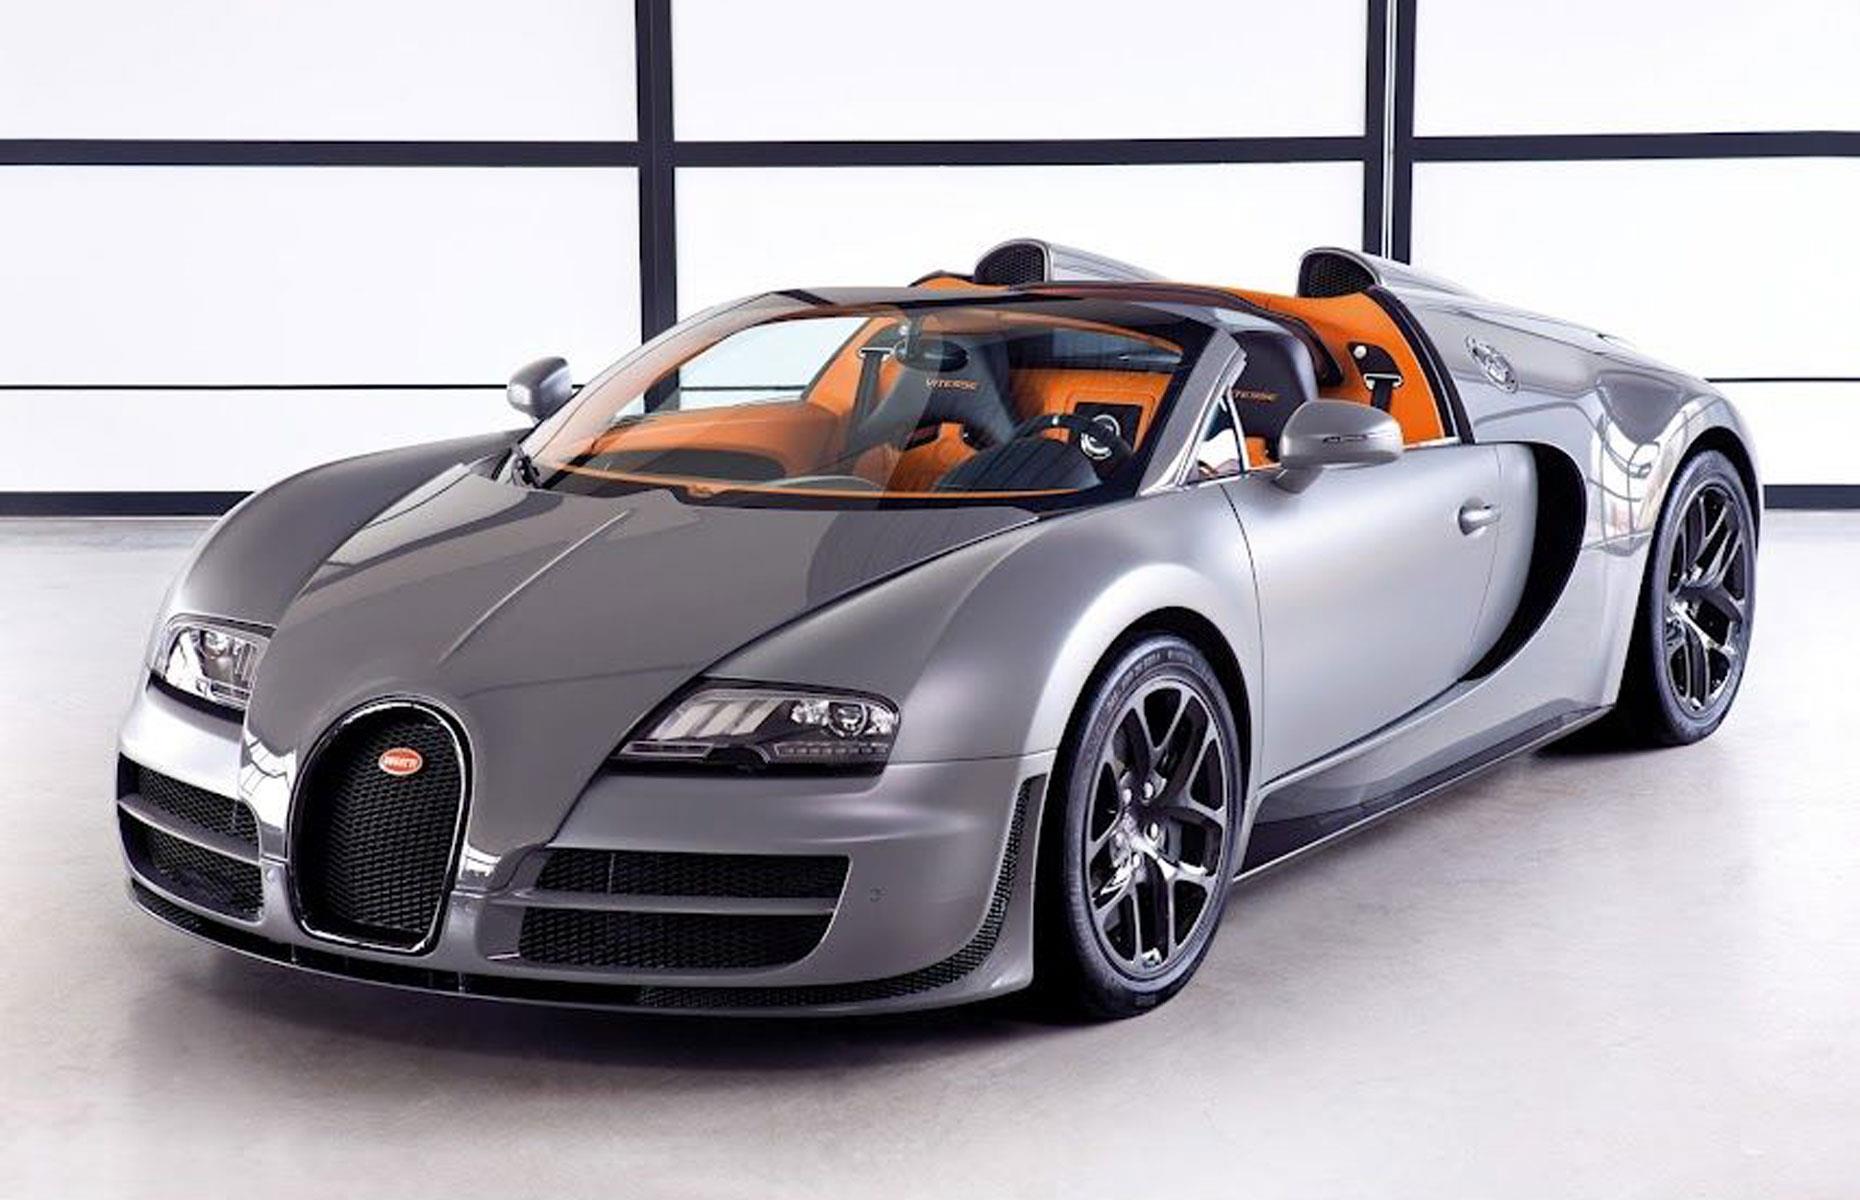 Back to Jay-Z. In 2010 the hip-hop star's mega-generous wife Beyoncé pulled out all the stops and then some for her husband's 41st birthday by gifting him a silver Bugatti Veyron Grand Sport. The supercar would have cost her a cool $2 million (£1.3m), based on the list price for that year.